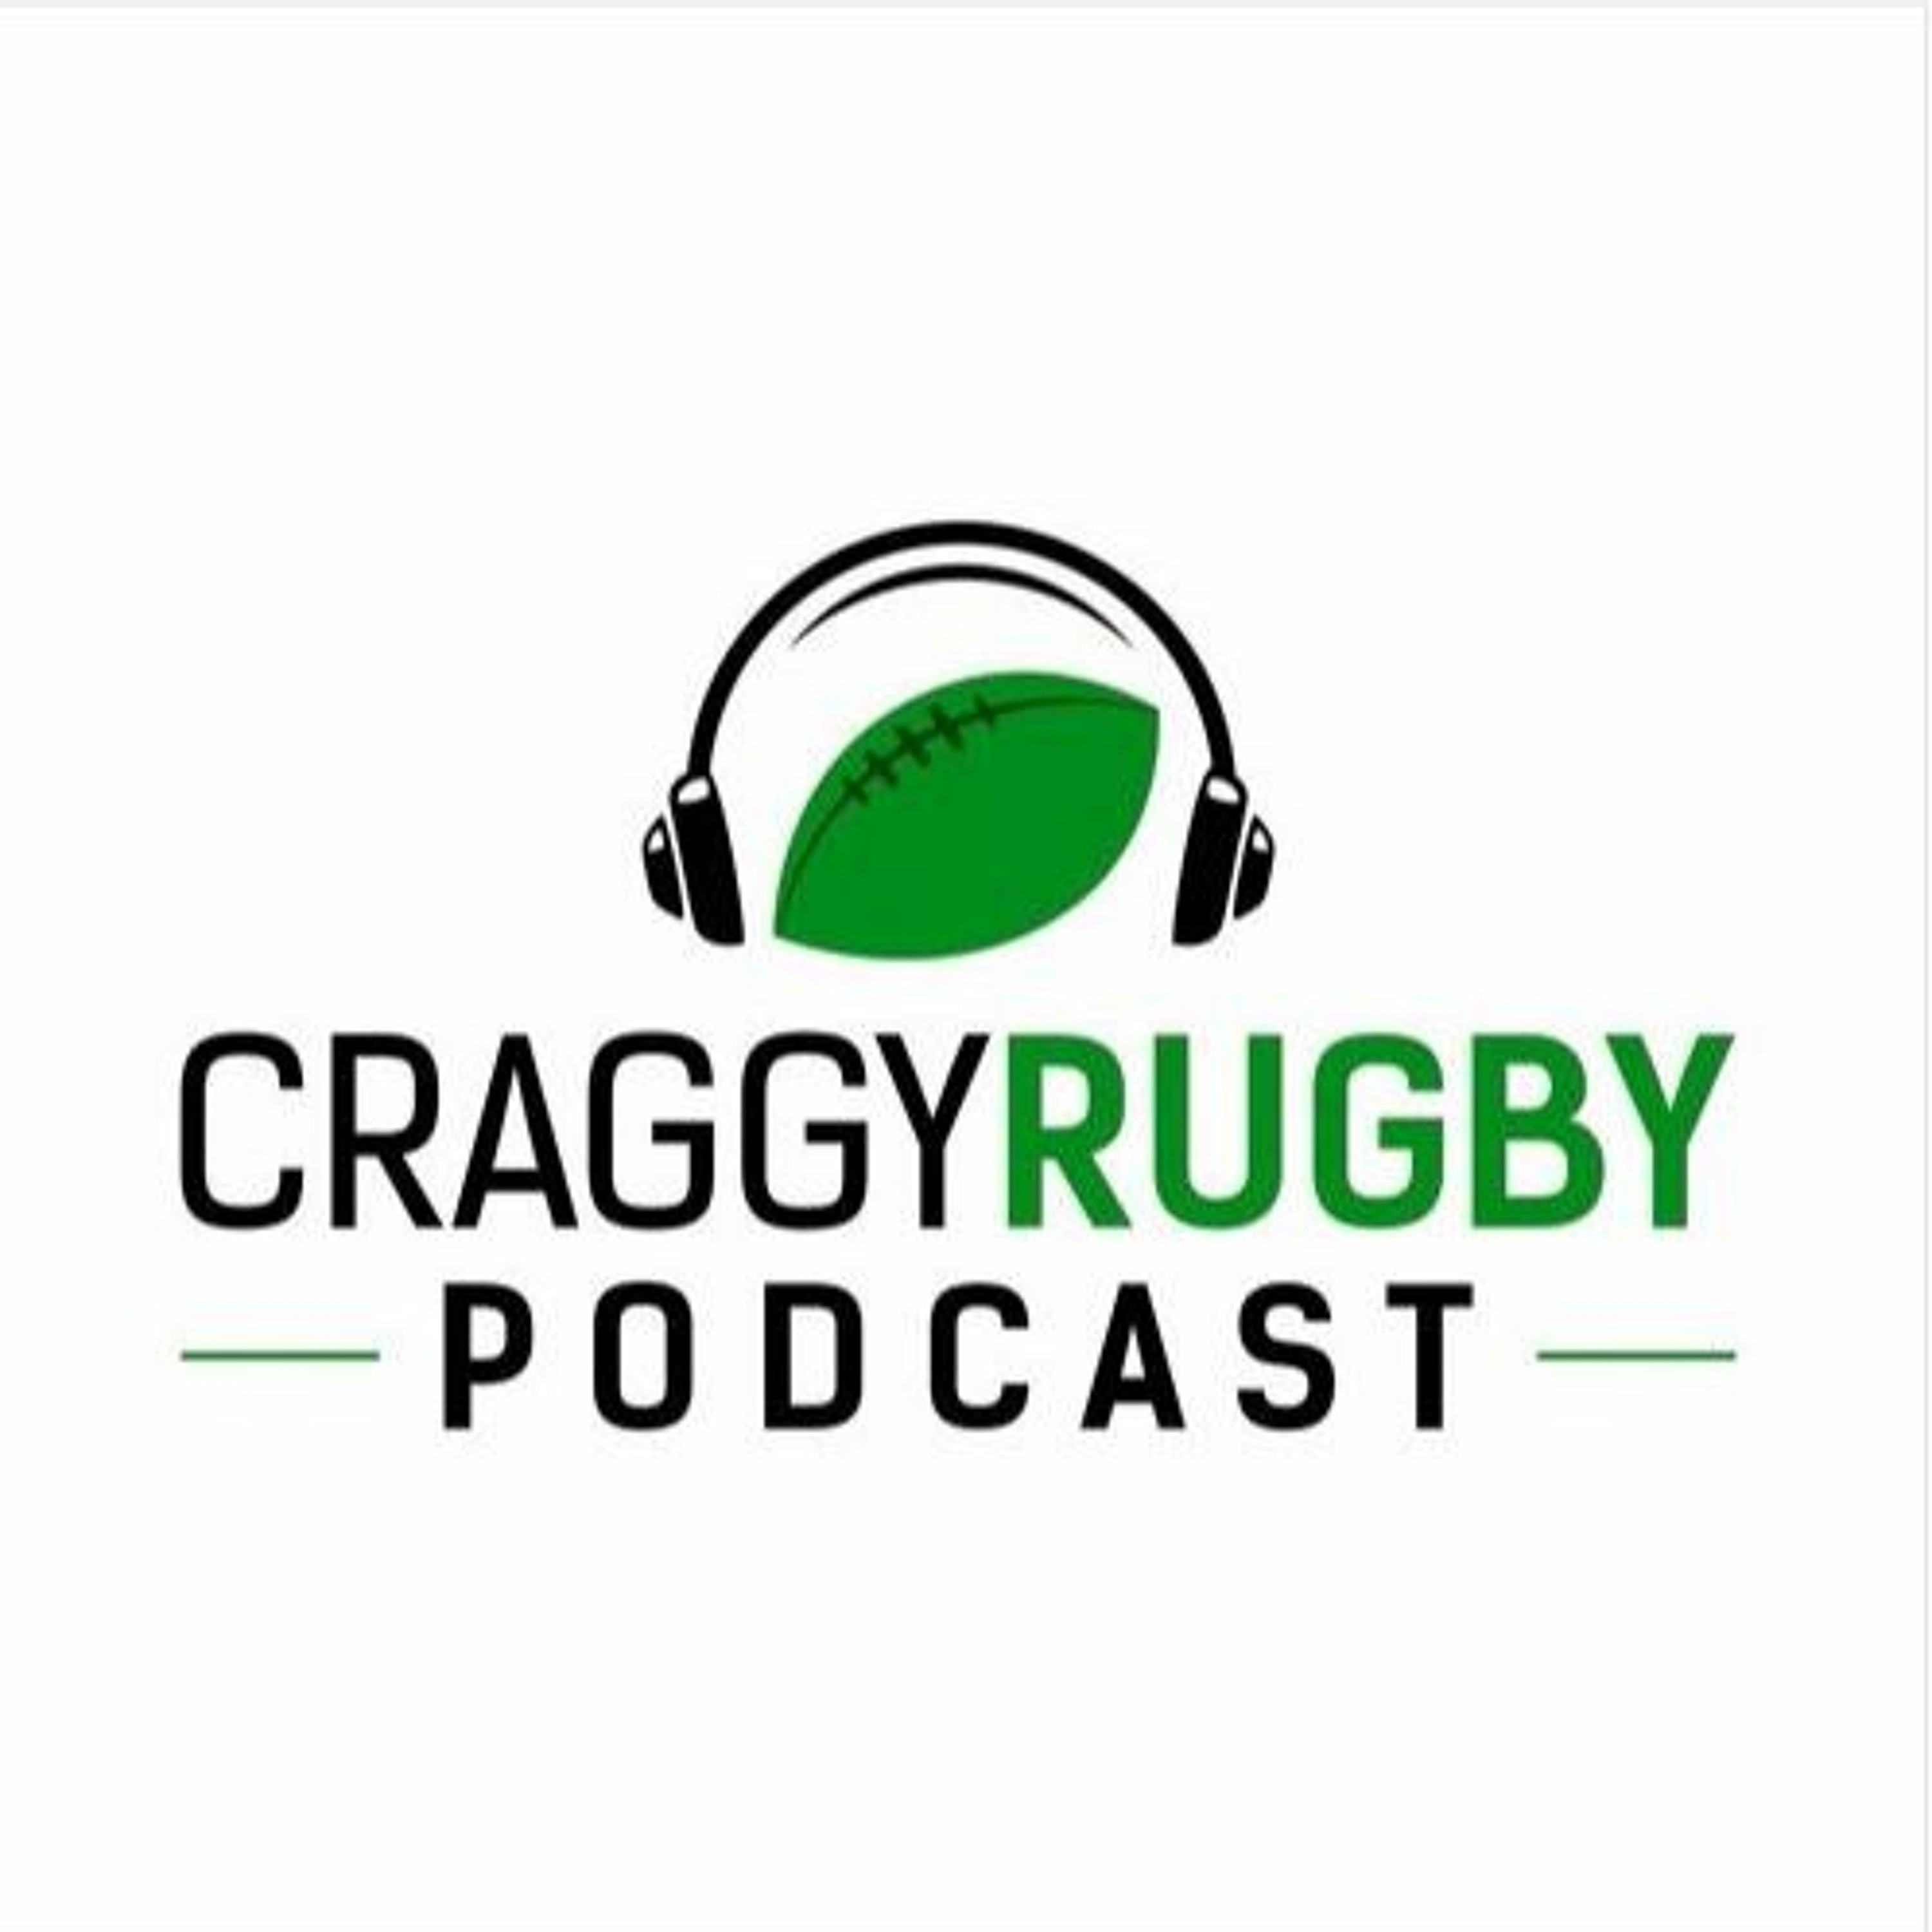 Never A Dull Moment - Gloucester 14 Connacht 7 - Craggy Rugby podcast